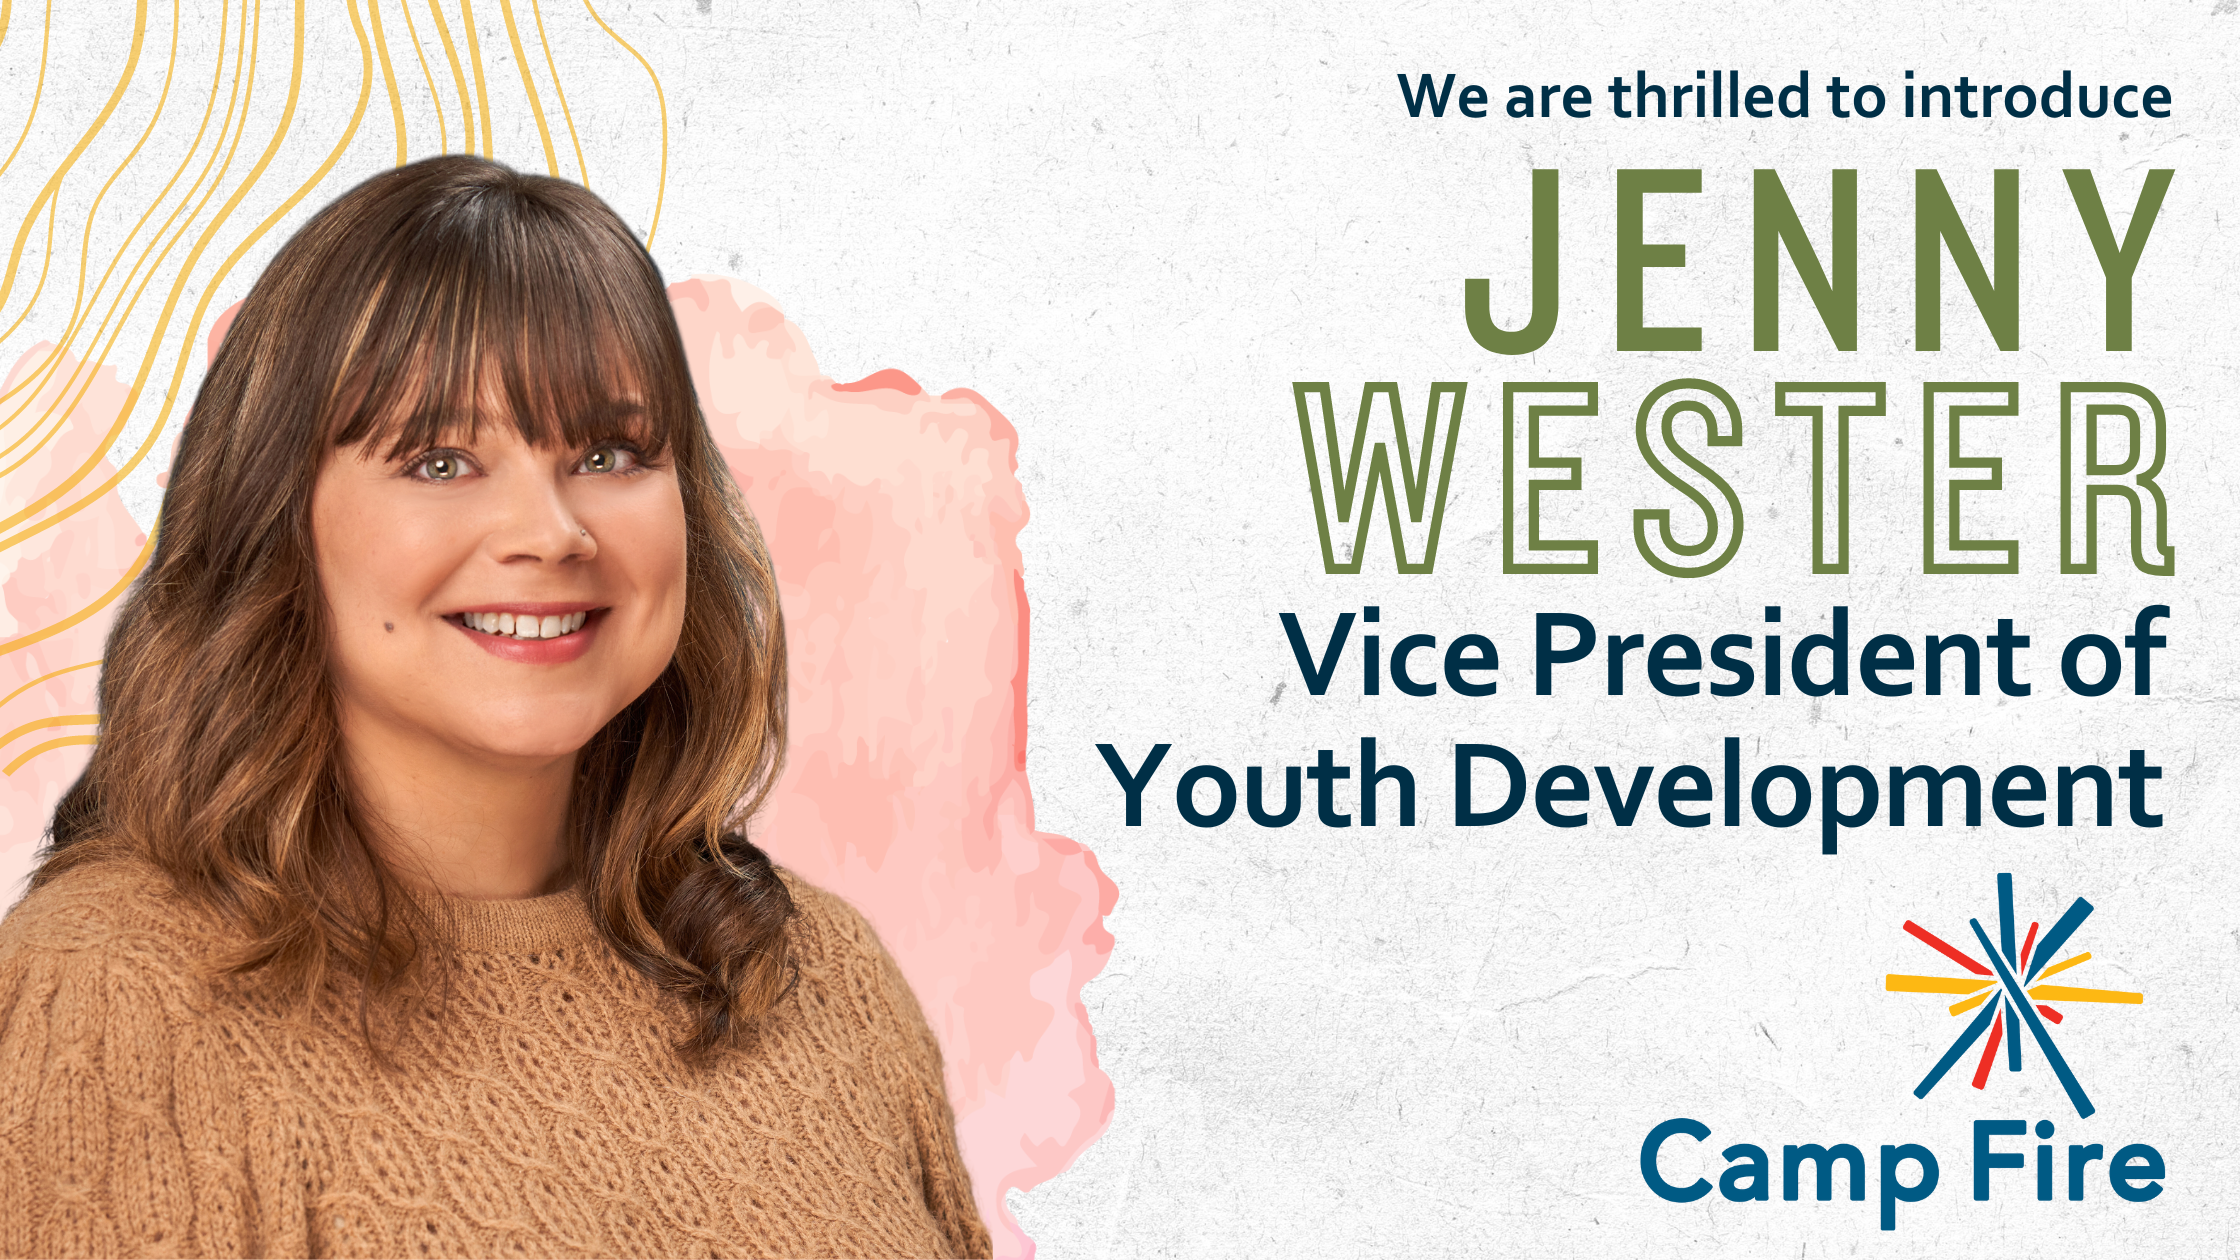 Camp Fire First Texas Welcomes Jenny Wester as Vice President of Youth Development